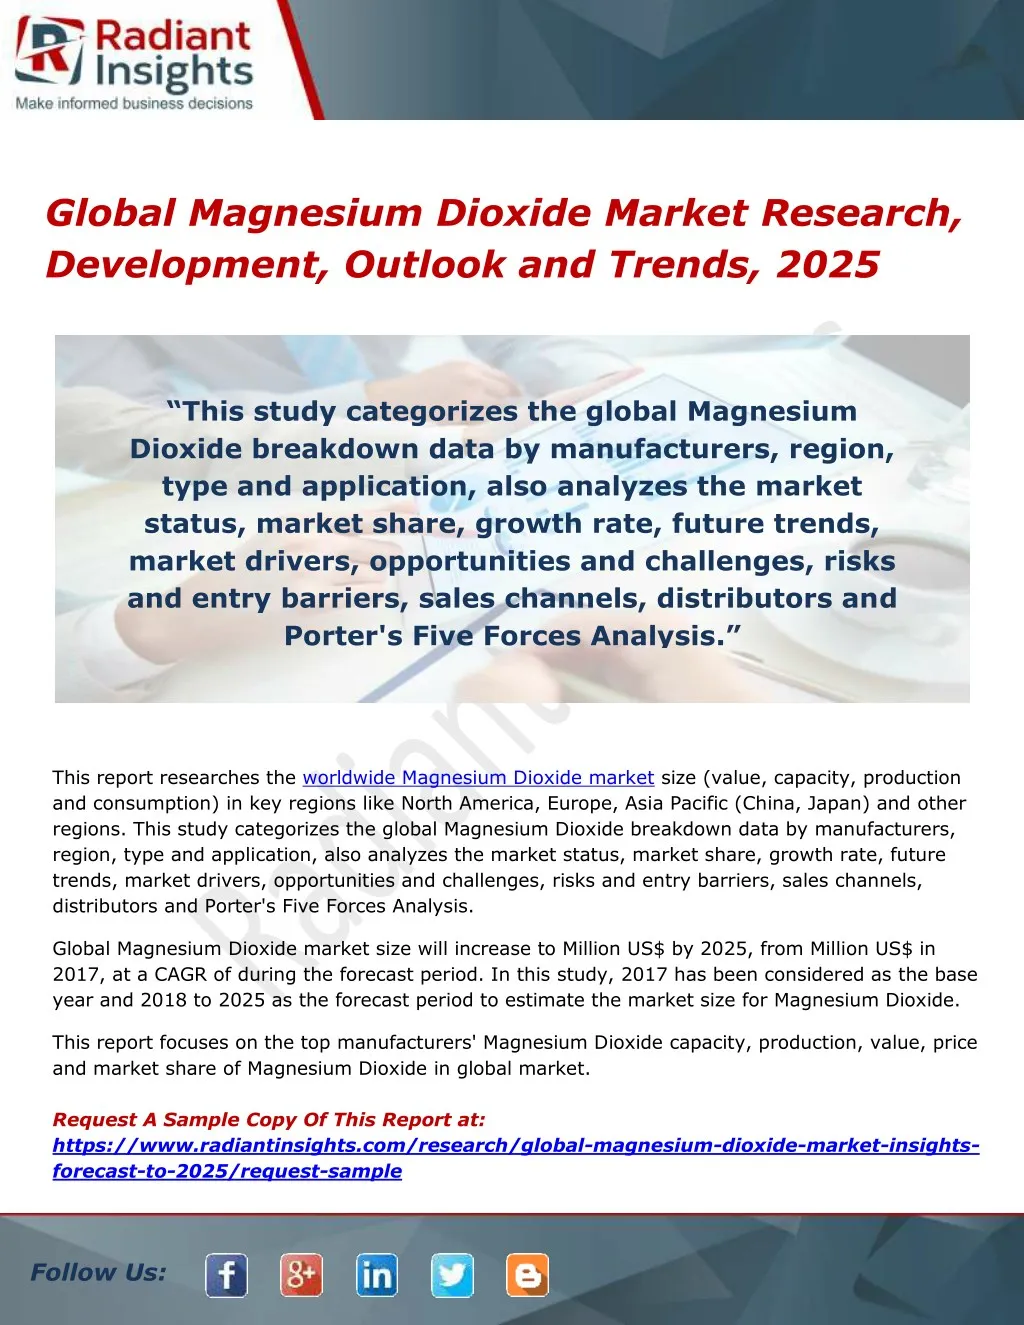 global magnesium dioxide market research